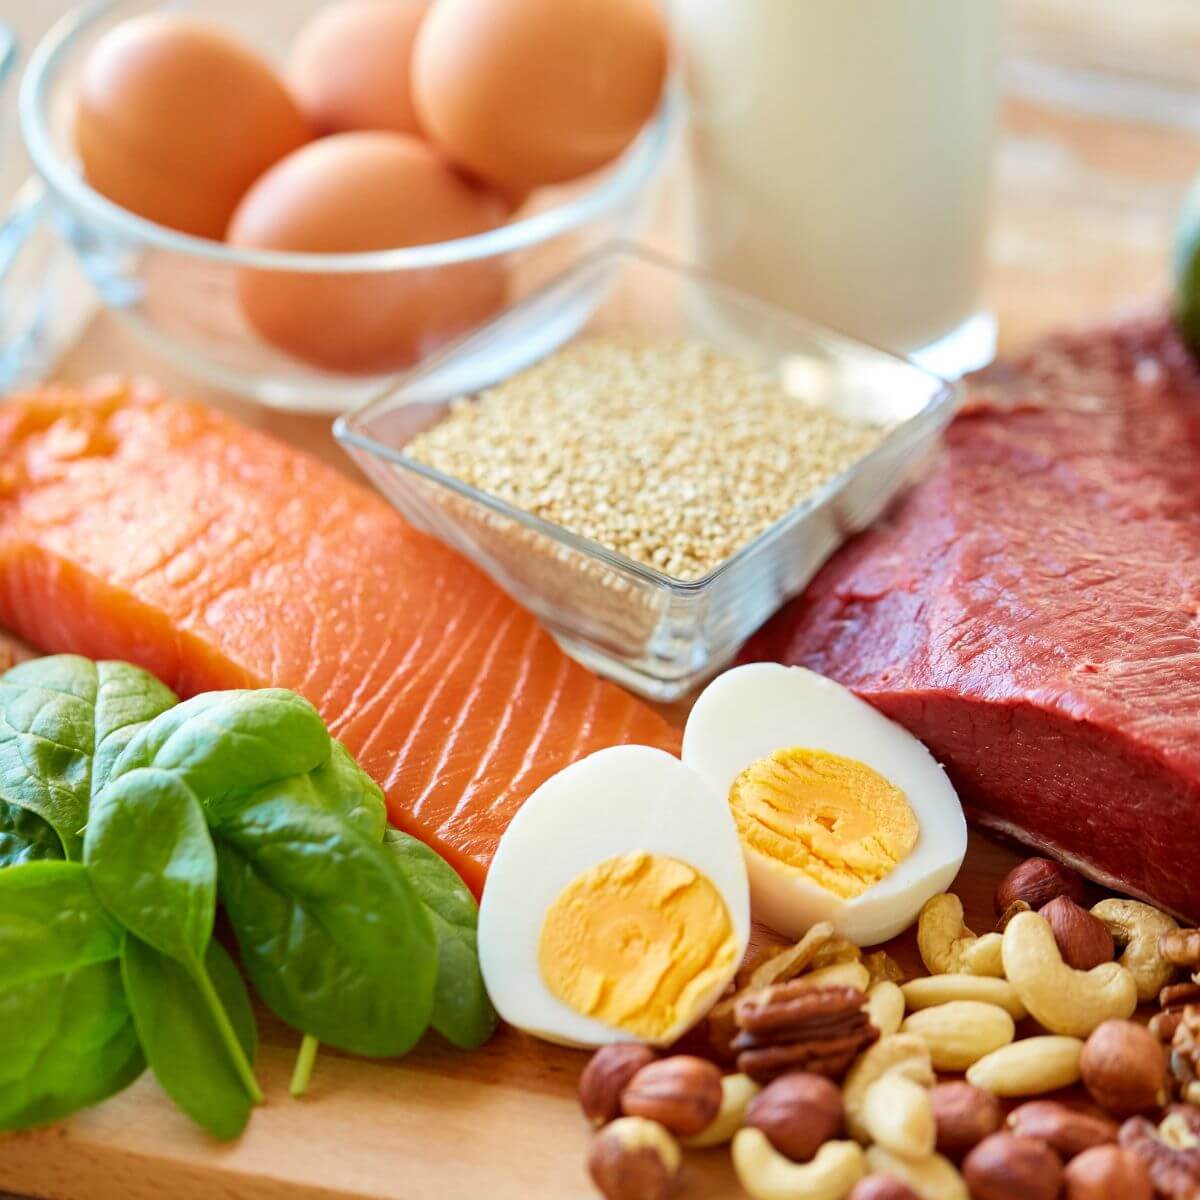 What are proteins and how do they help us with hormone function?